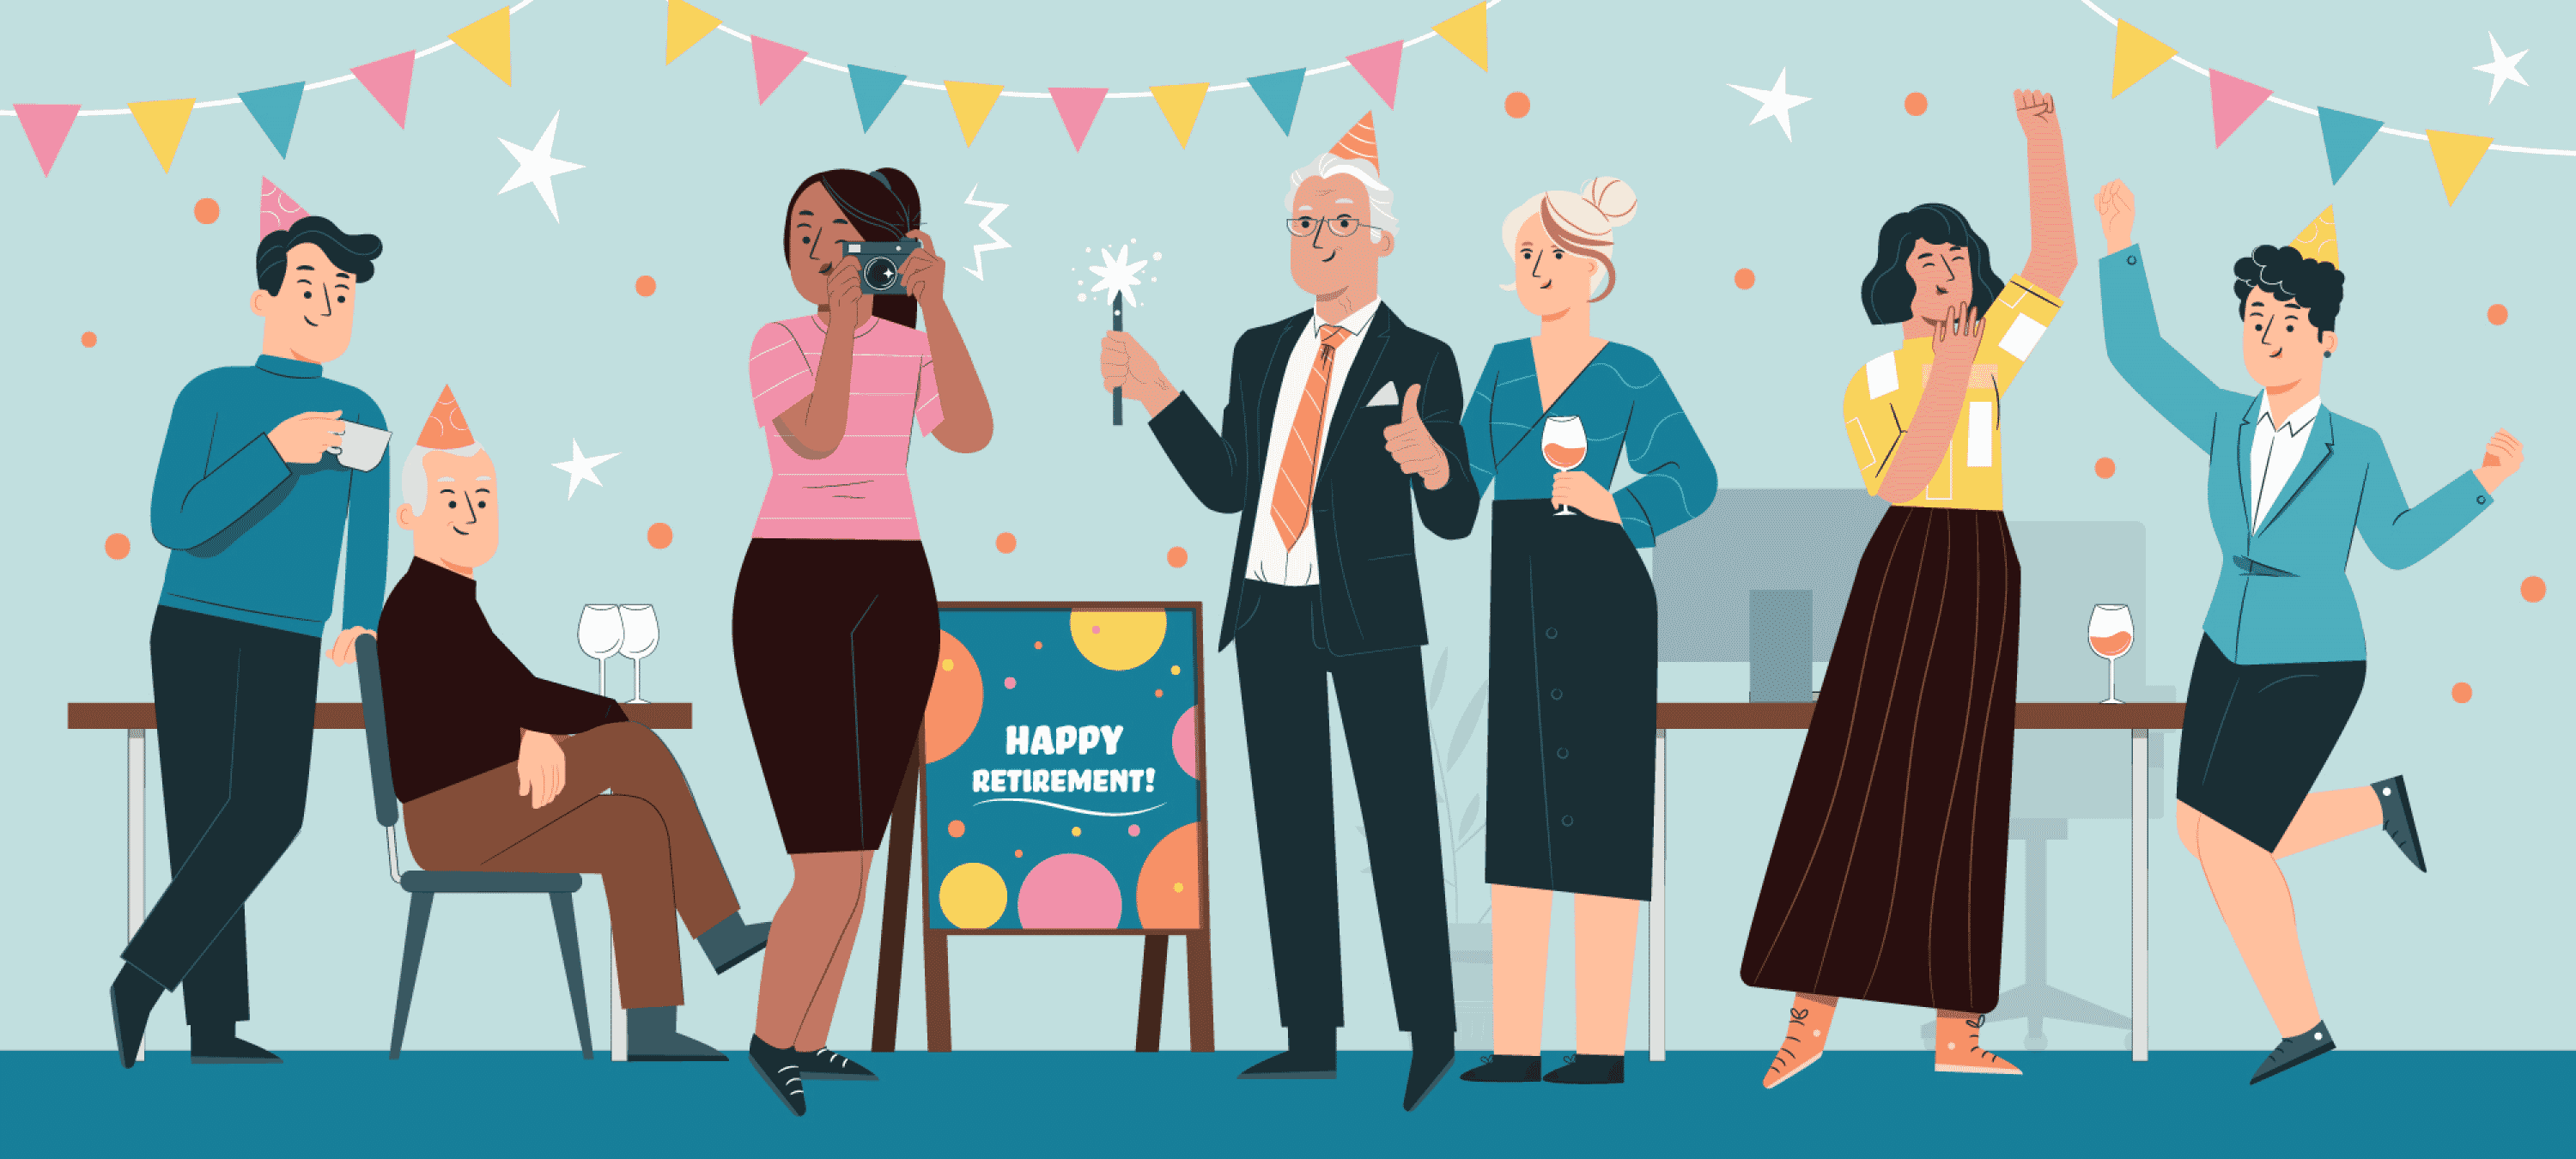 11 Fun Retirement Party Ideas for Work: Gifts, Décor, Music & More